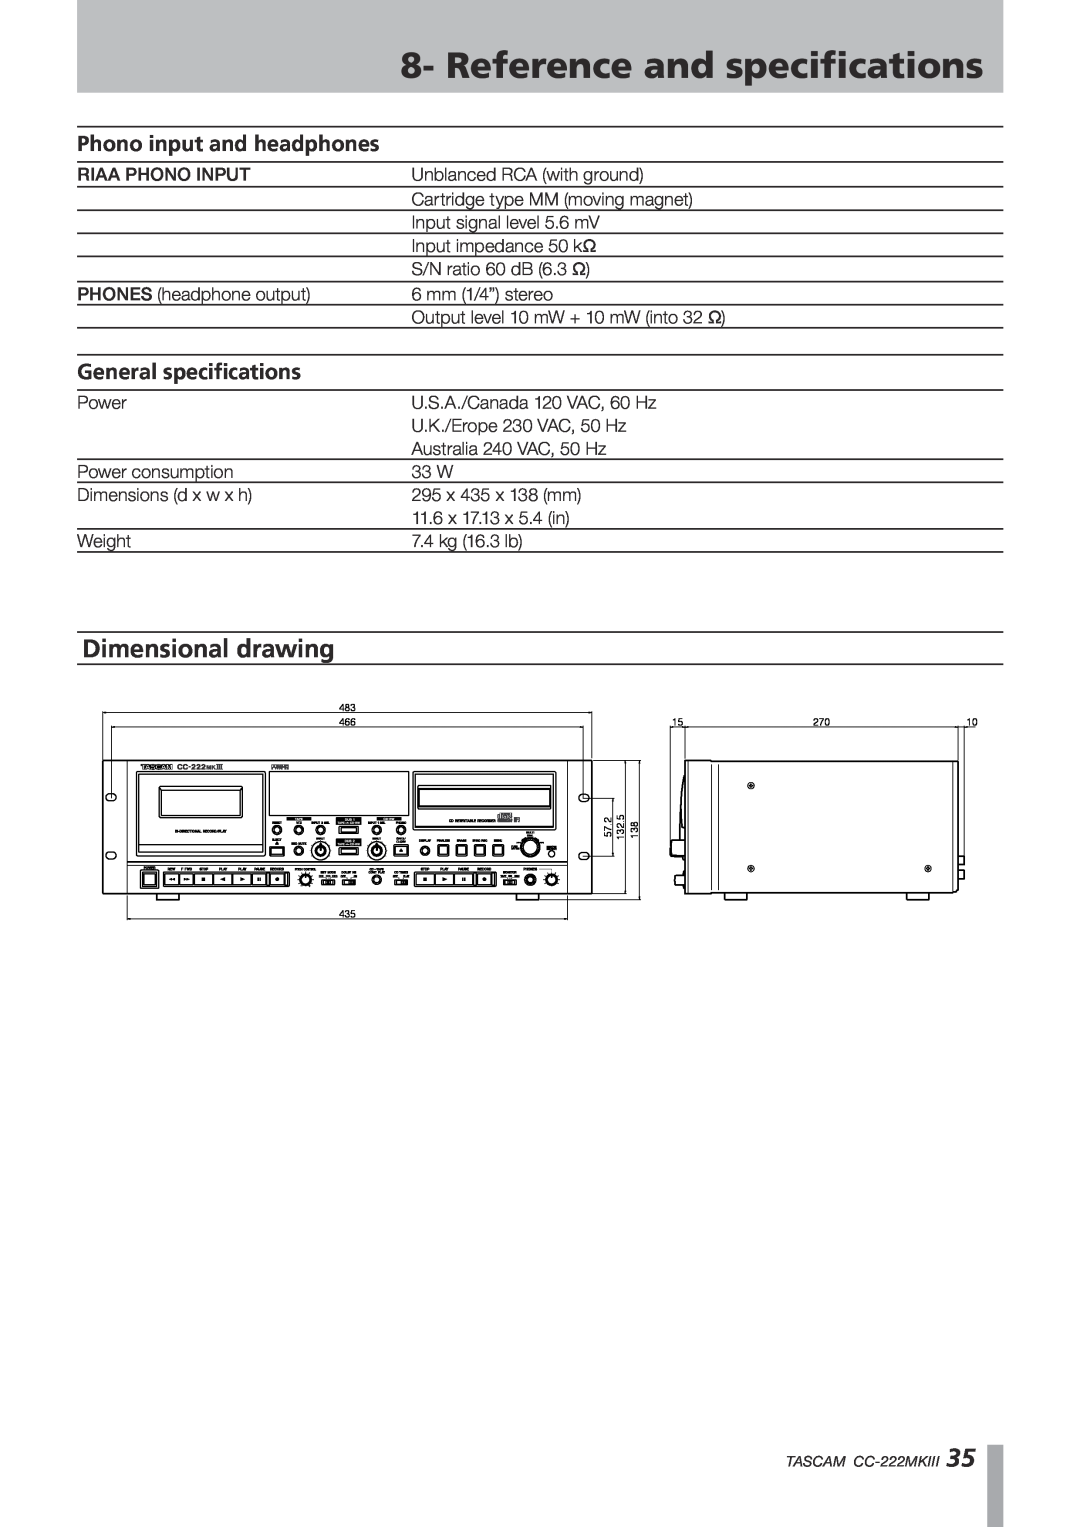 Tascam CC-222MK Dimensional drawing, Reference and specifications, Phono input and headphones, General specifications 